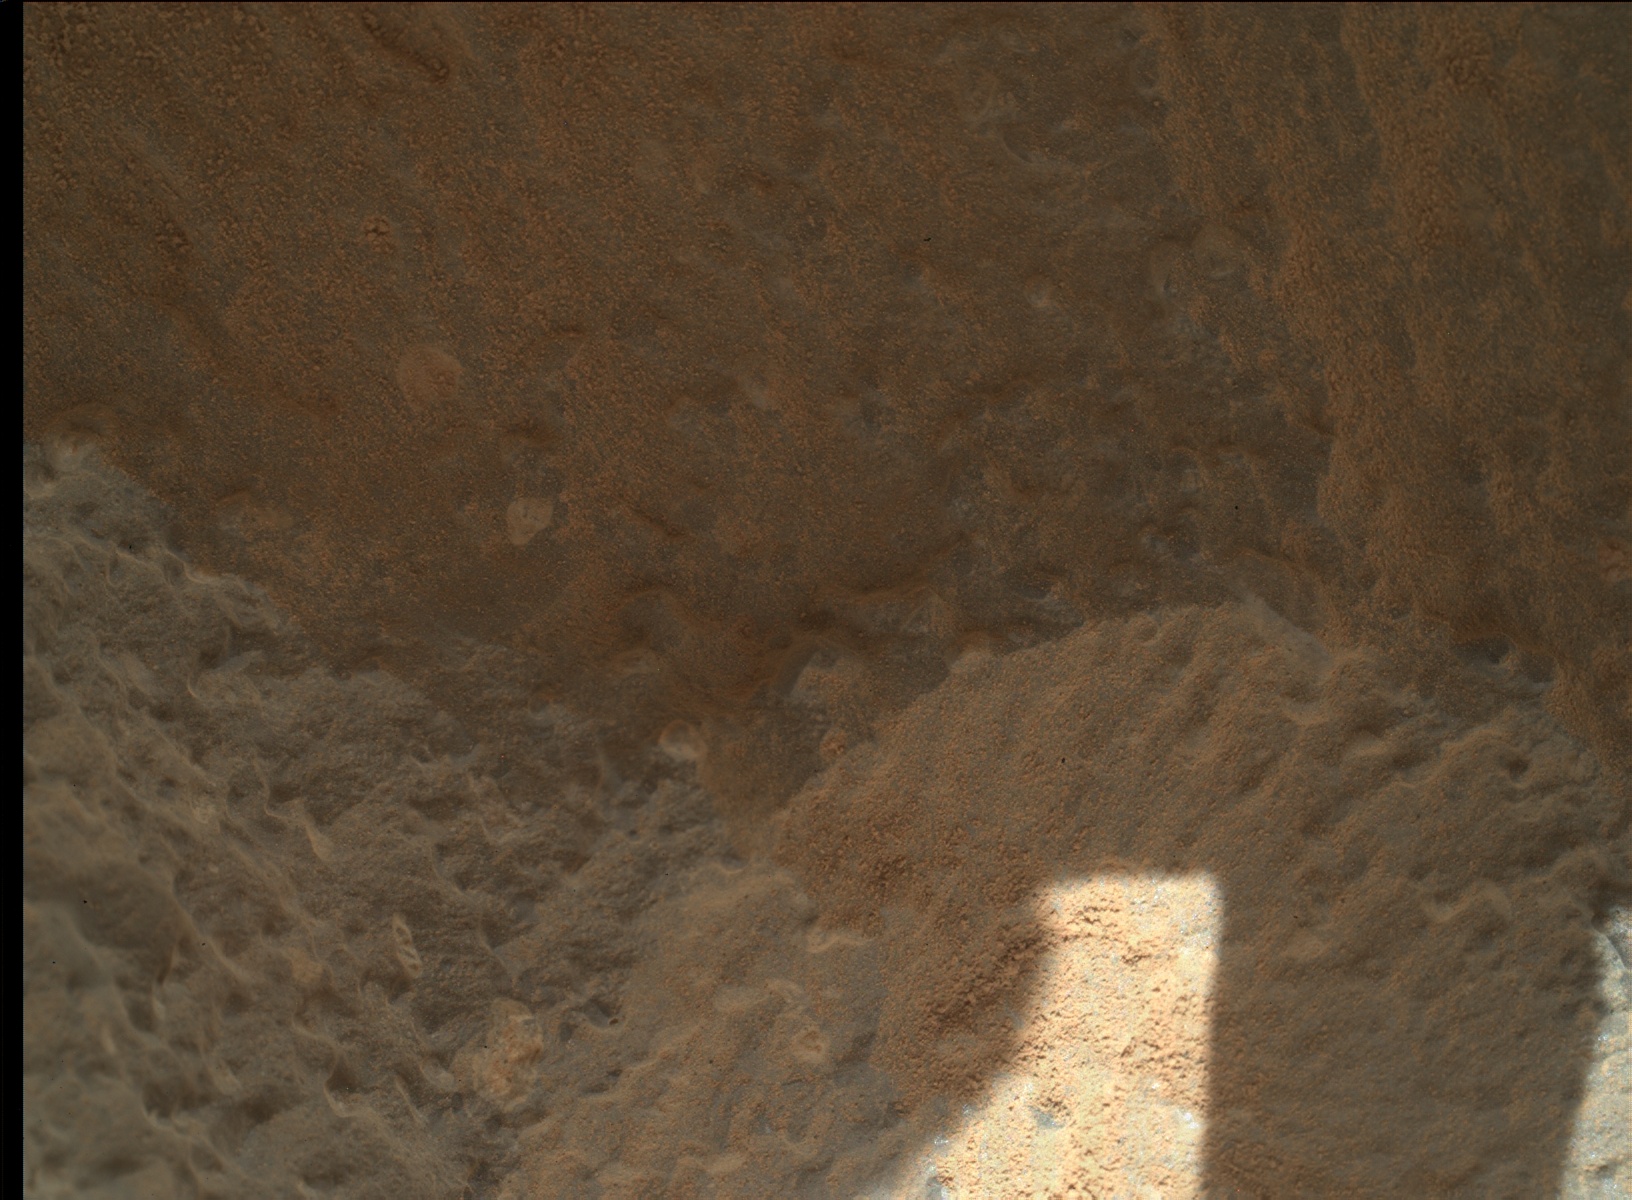 Nasa's Mars rover Curiosity acquired this image using its Mars Hand Lens Imager (MAHLI) on Sol 633, at drive 0, site number 32